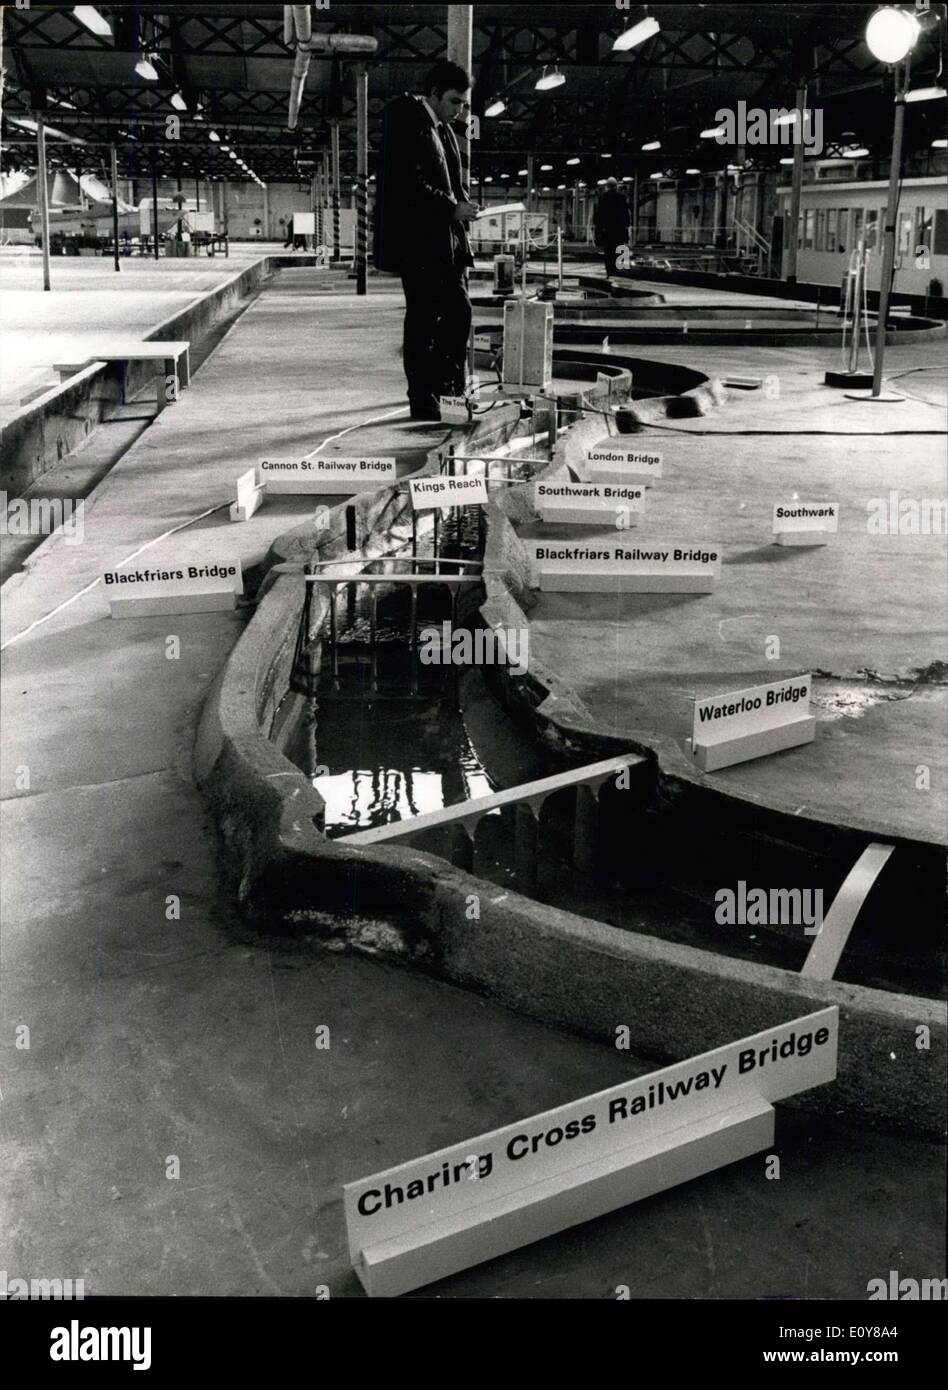 Jan. 31, 1969 - London flood protests on model: Part of a 385ft long model of the Thames, representing a 62 mile stretch from Teddiington to Southend which has been completed by the Ministry of Technology Hydraulics Research Station by the Ministry of Technology's Hydraulics Research Station at Didcot for the Greater London Council. It will be used for tests in a &40 million barrage or barrier plan to protect London from severe flooding. At a Press conference in Didcot yesterday, Mr. S. Dainty, the G.L Stock Photo